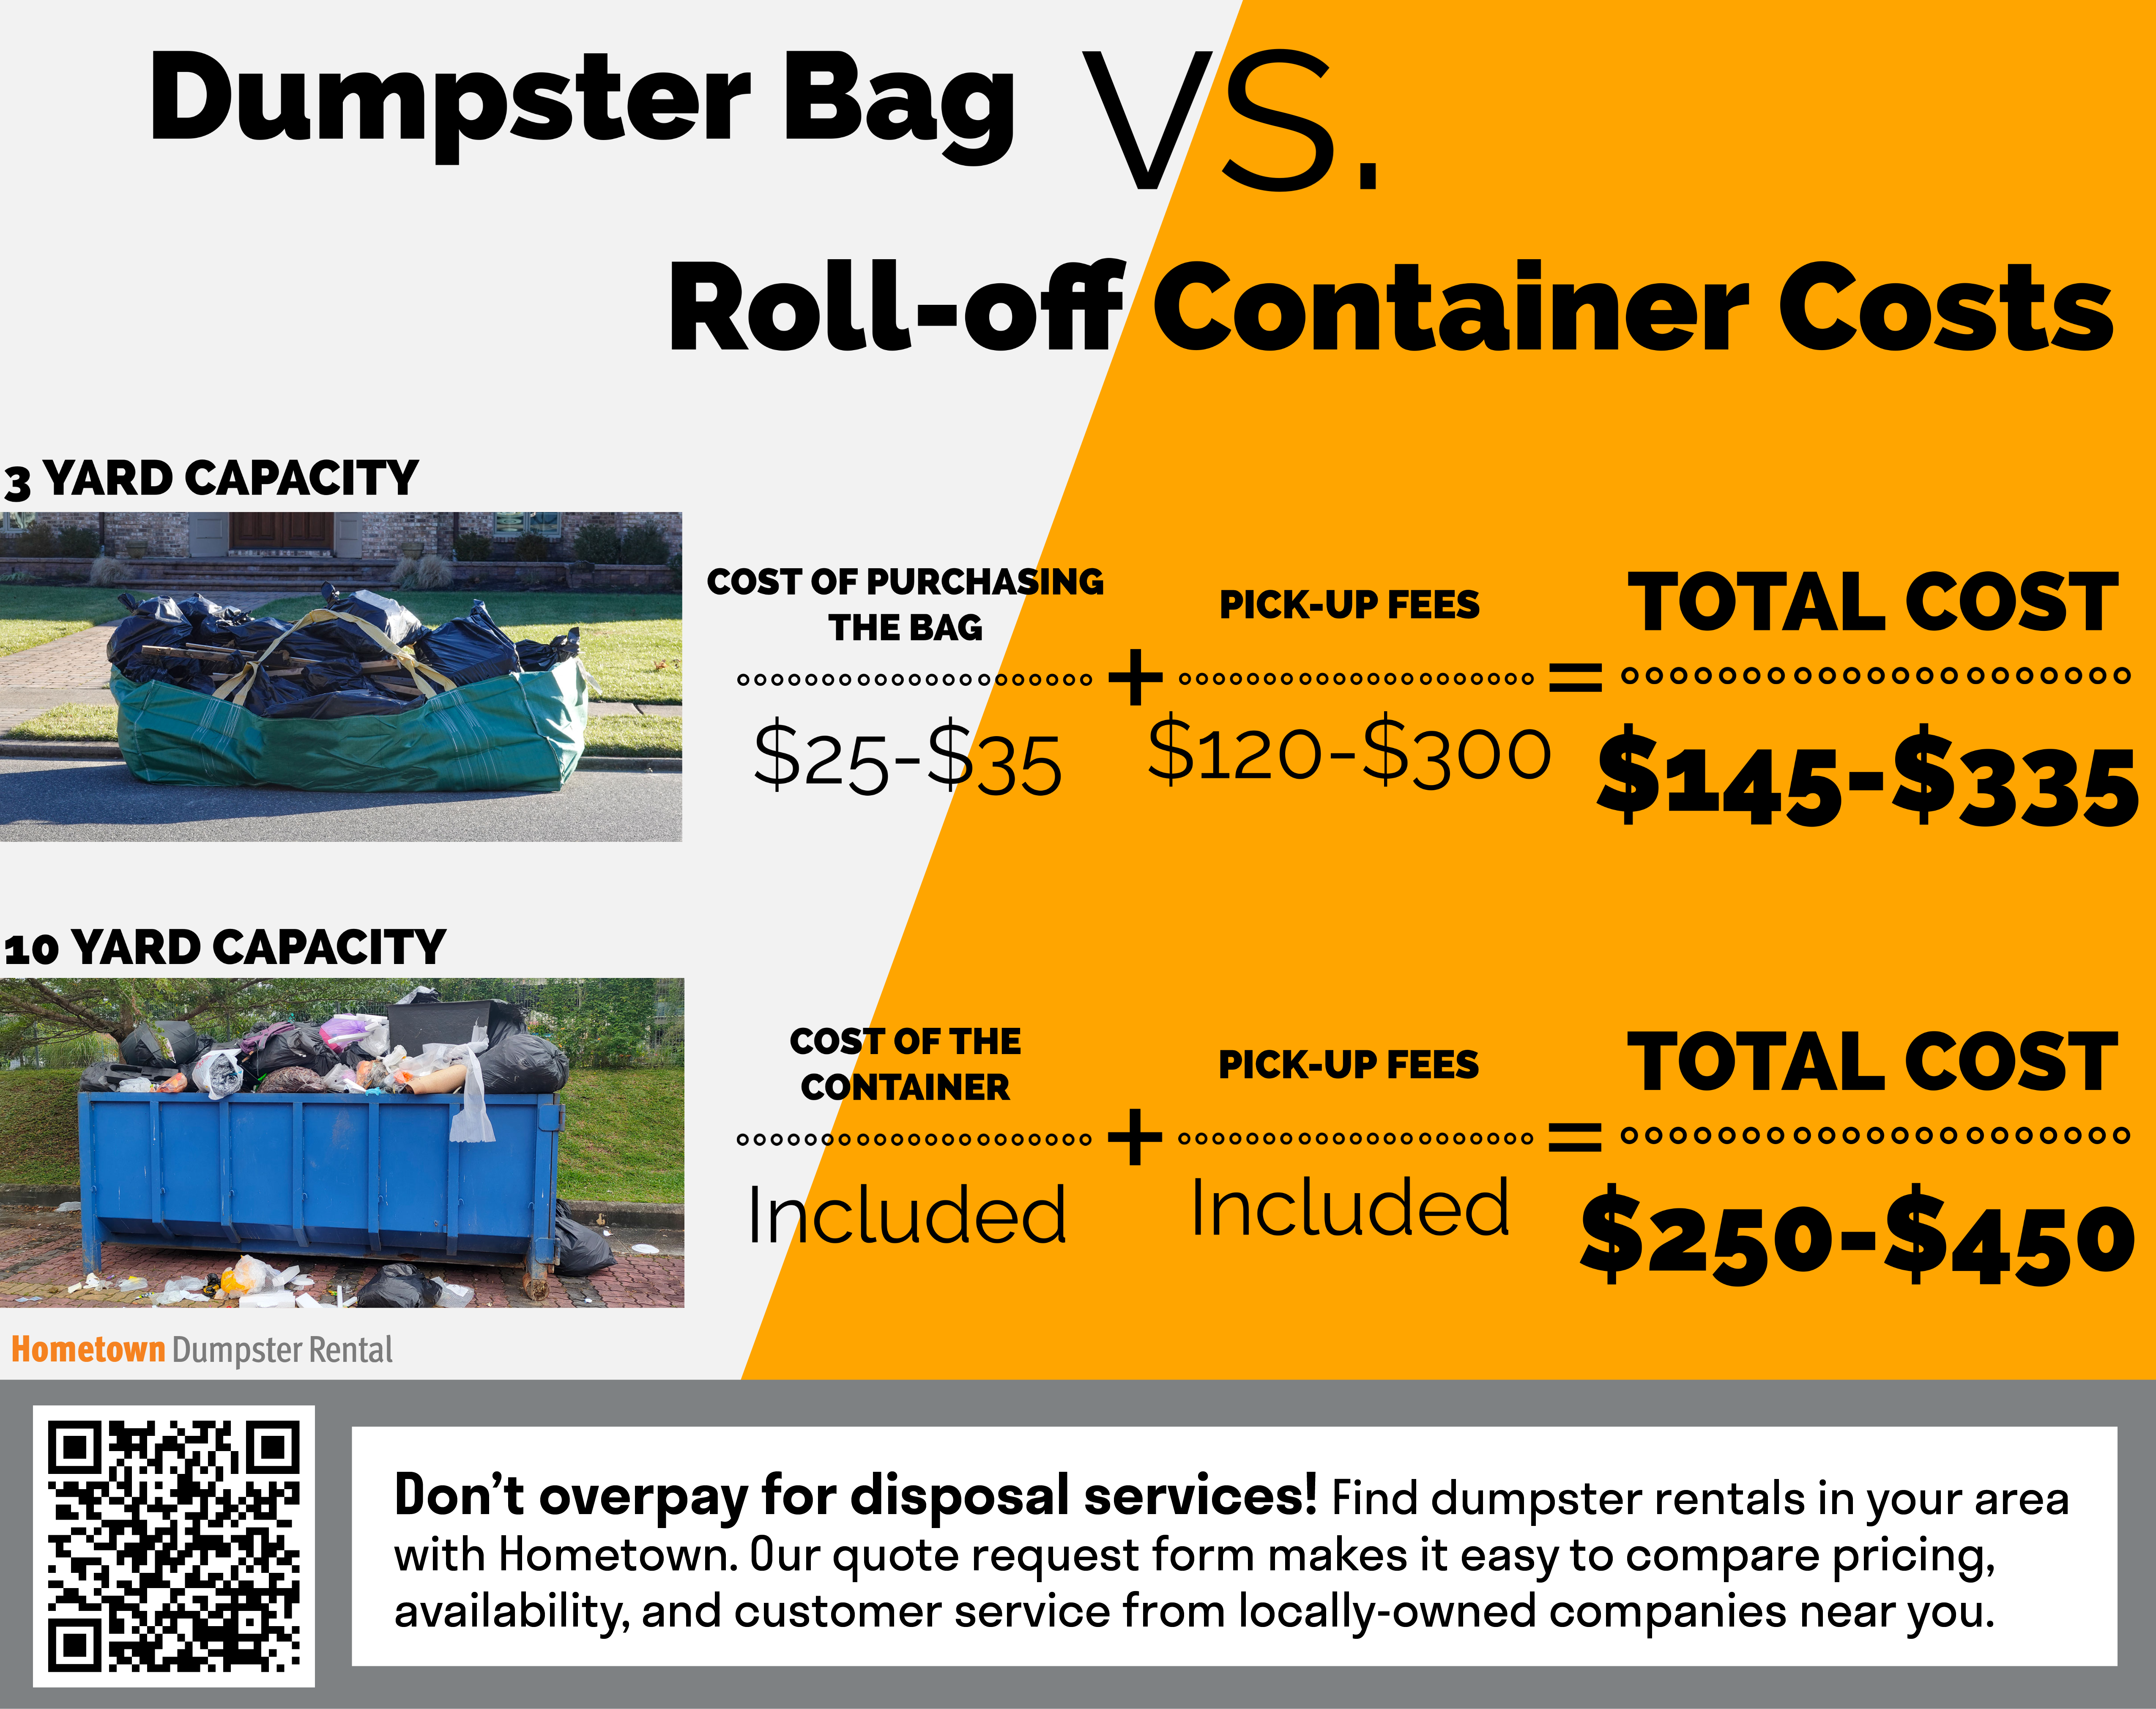 Dumpster Bag vs. Roll-off Container Costs Infographic